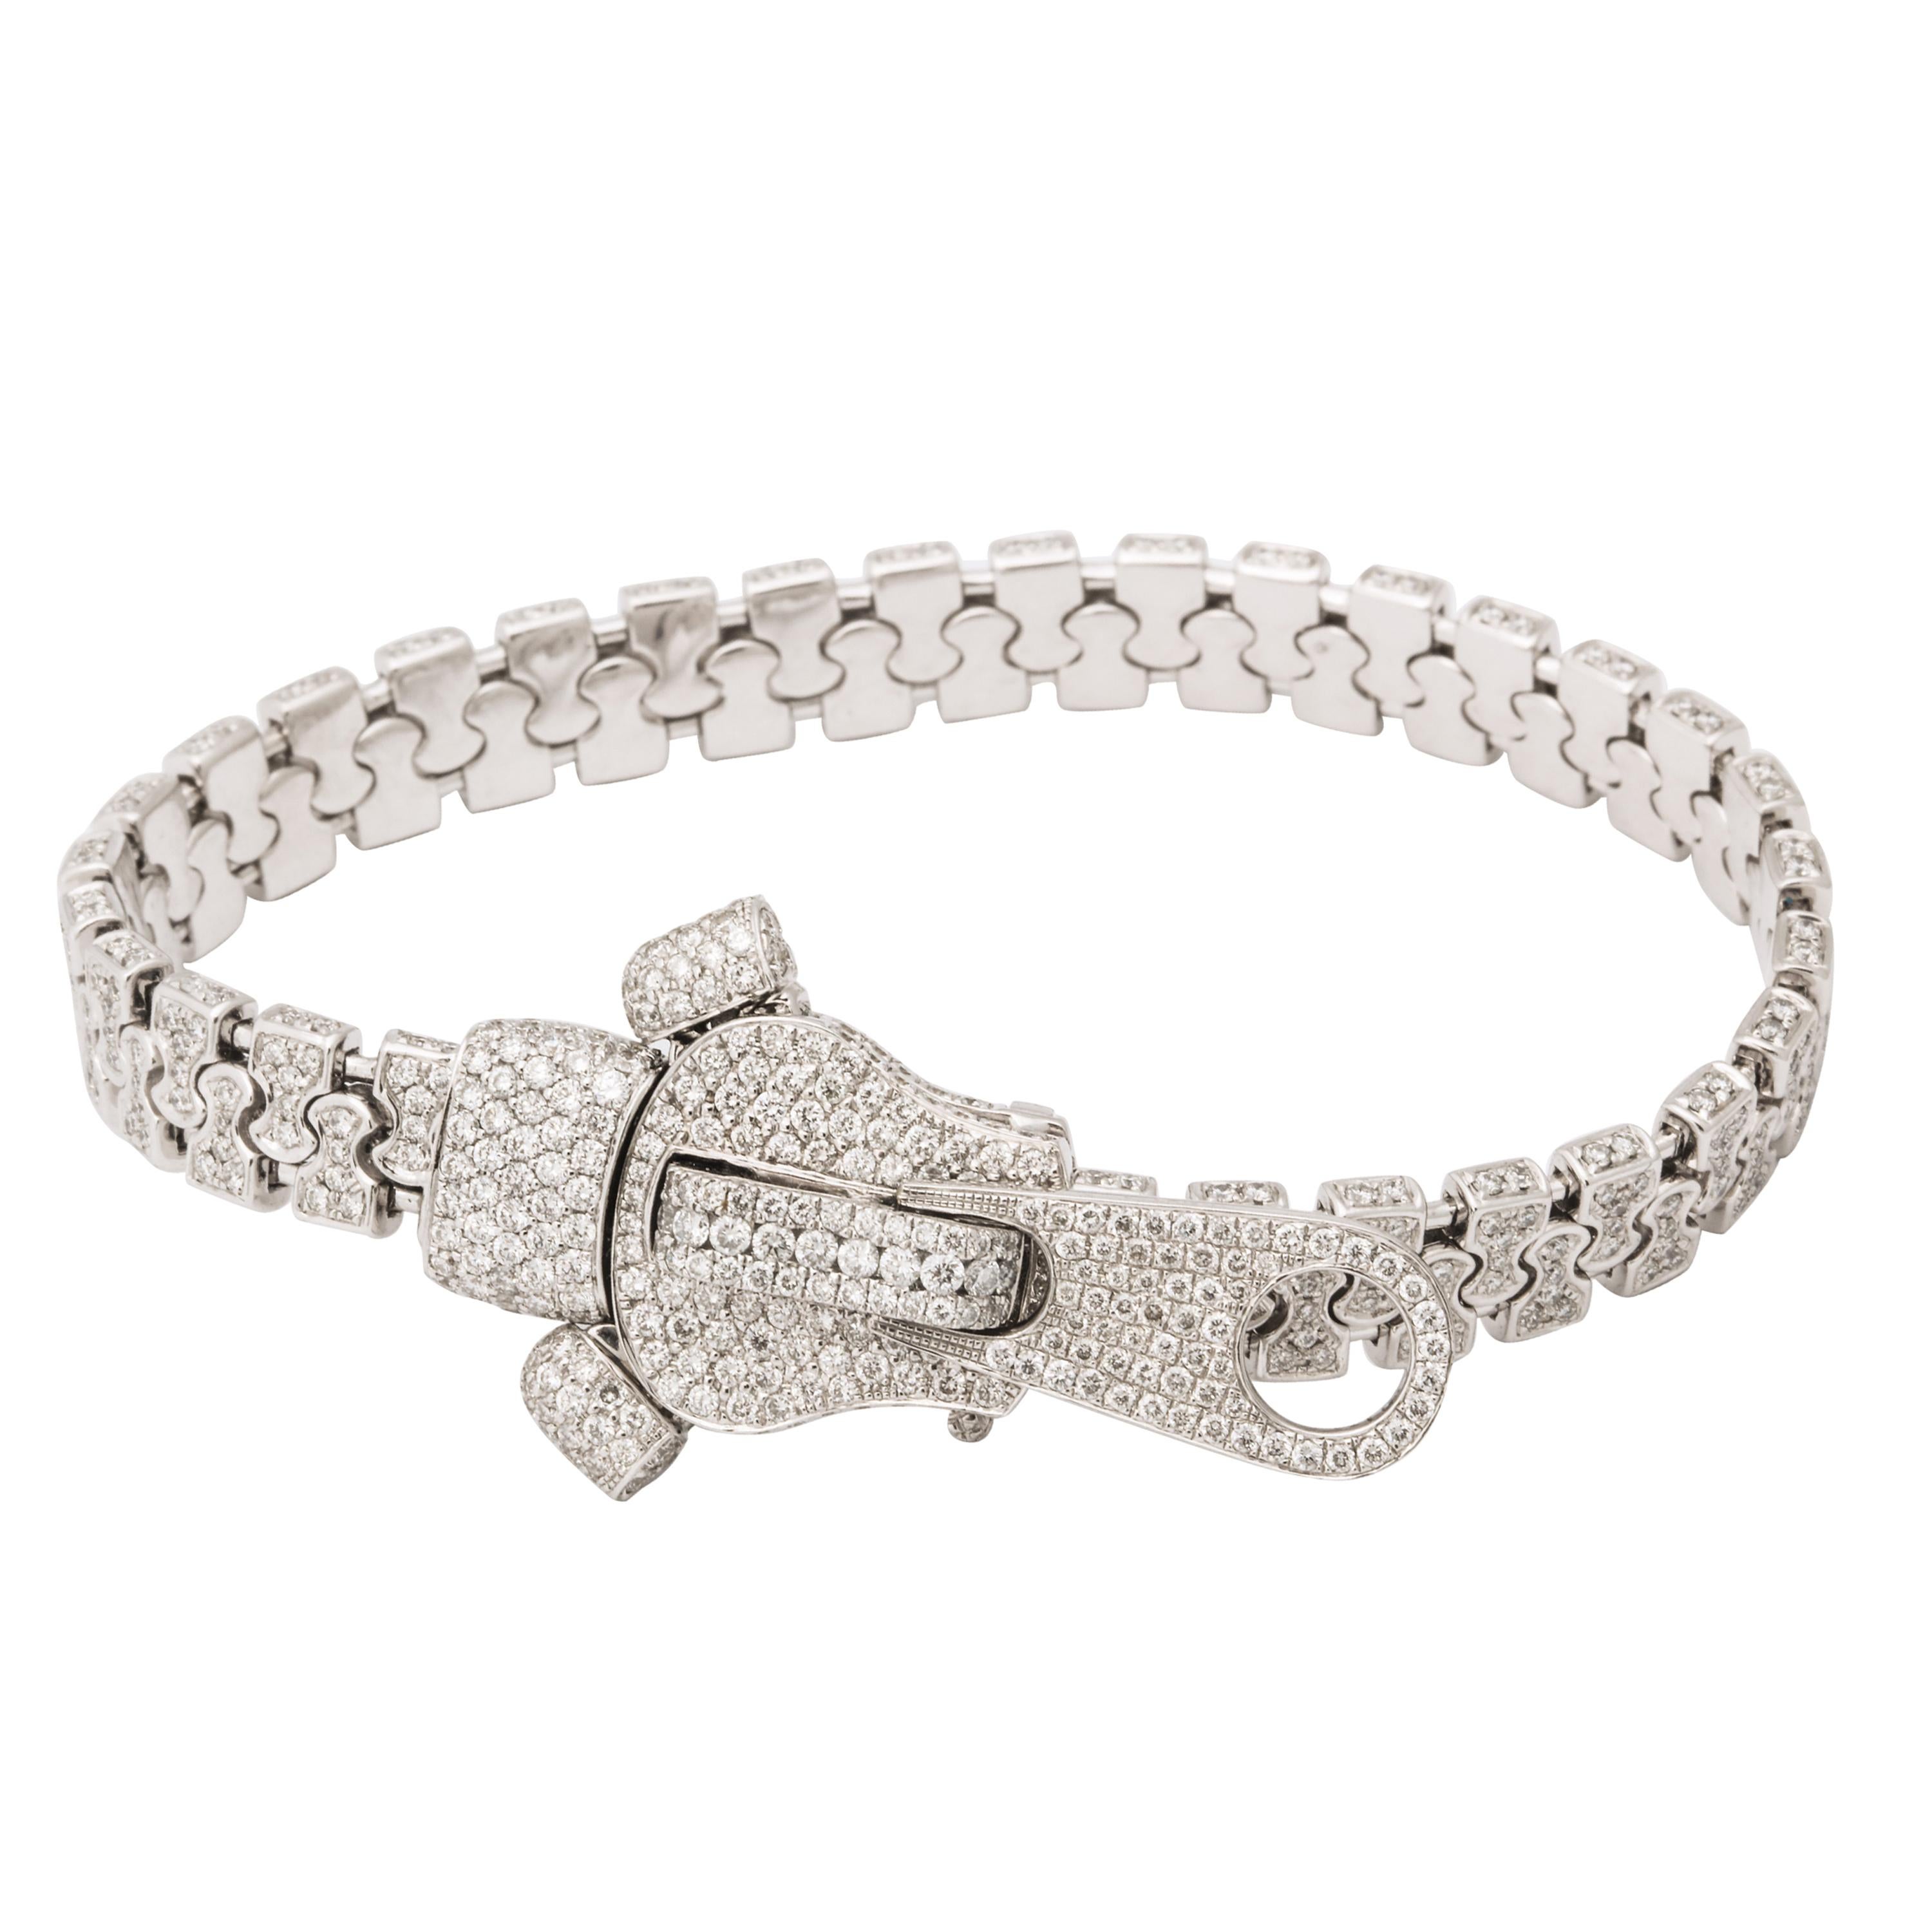 The most luxurious and decadent zipper that you have ever seen, this fully diamond set bracelet is a unique piece.  The jeweled zipper is a period design made by some of the famous French maisons, and generally seen as a necklace.  With nearly 5cts